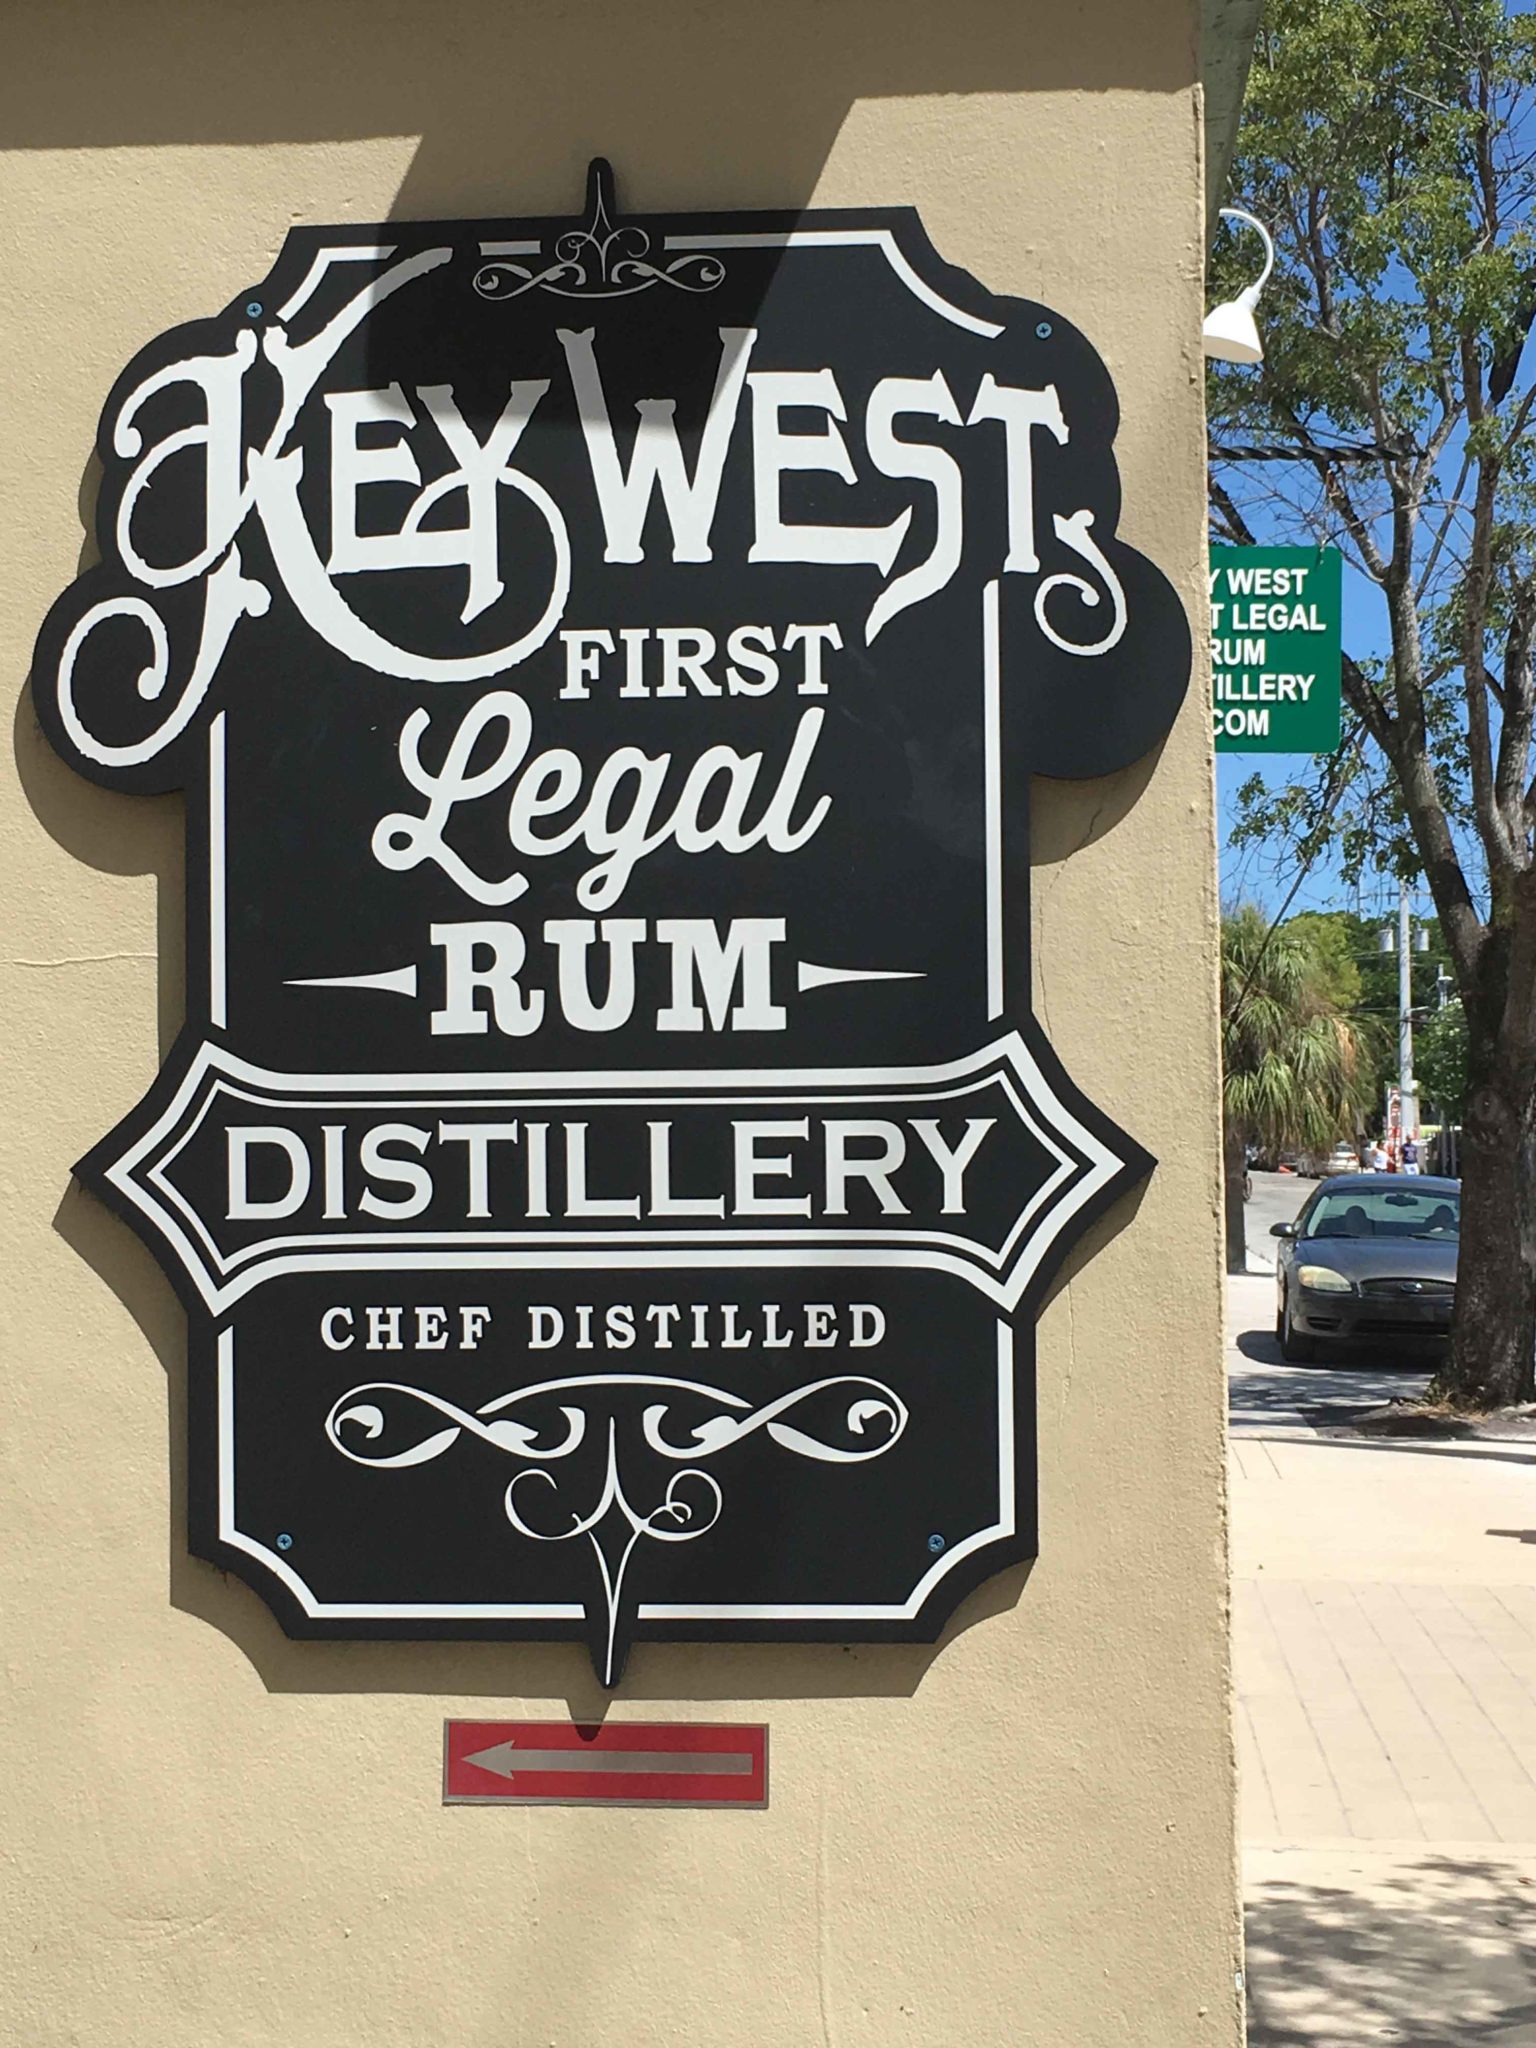 Key West First Legal Rum Distillery the Experience